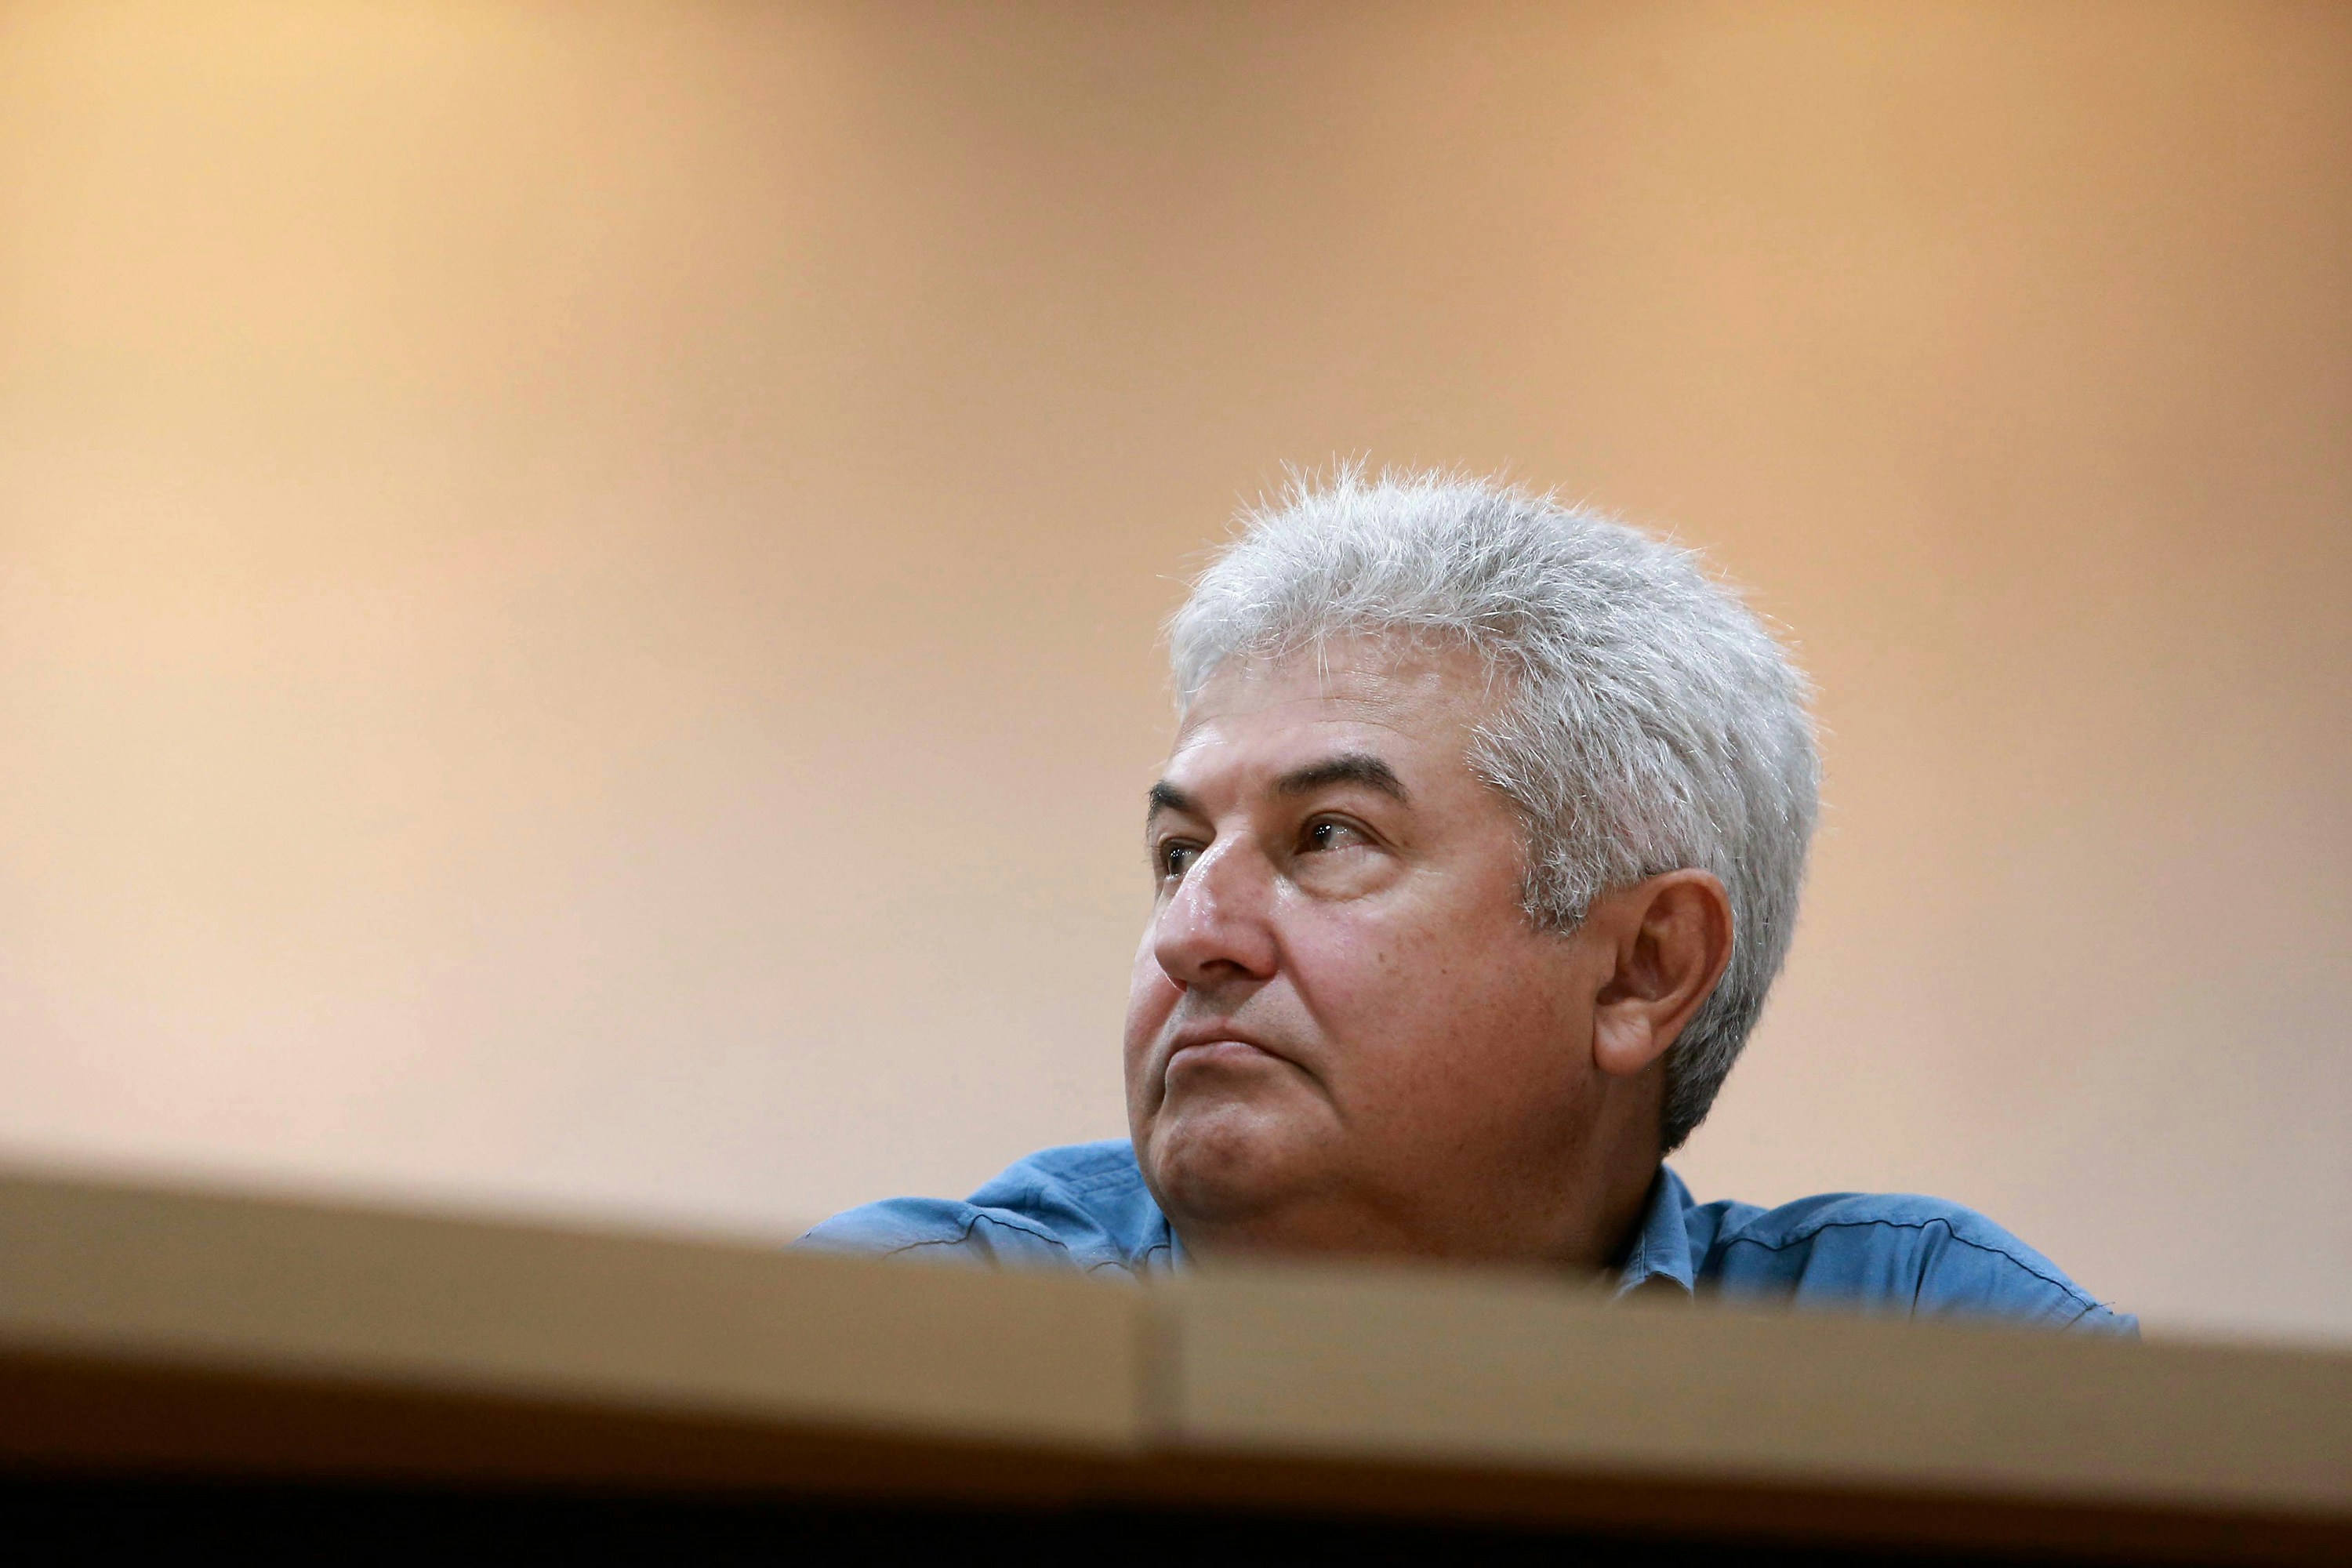 Brazilian astronaut Marcos Pontes attends a lecture with Army General Hamilton Mourao, vice presidential candidate of right-wing Jair Bolsonaro, at Toledo Teaching Institution, in Bauru, in the Brazilian state of Sao Paulo, on September 19, 2018. Pontes supports Bolsonaro's candidacy. Photo: TIAGO QUEIROZ/ESTADÃO CONTEÚDO (Agencia Estado via AP Images)